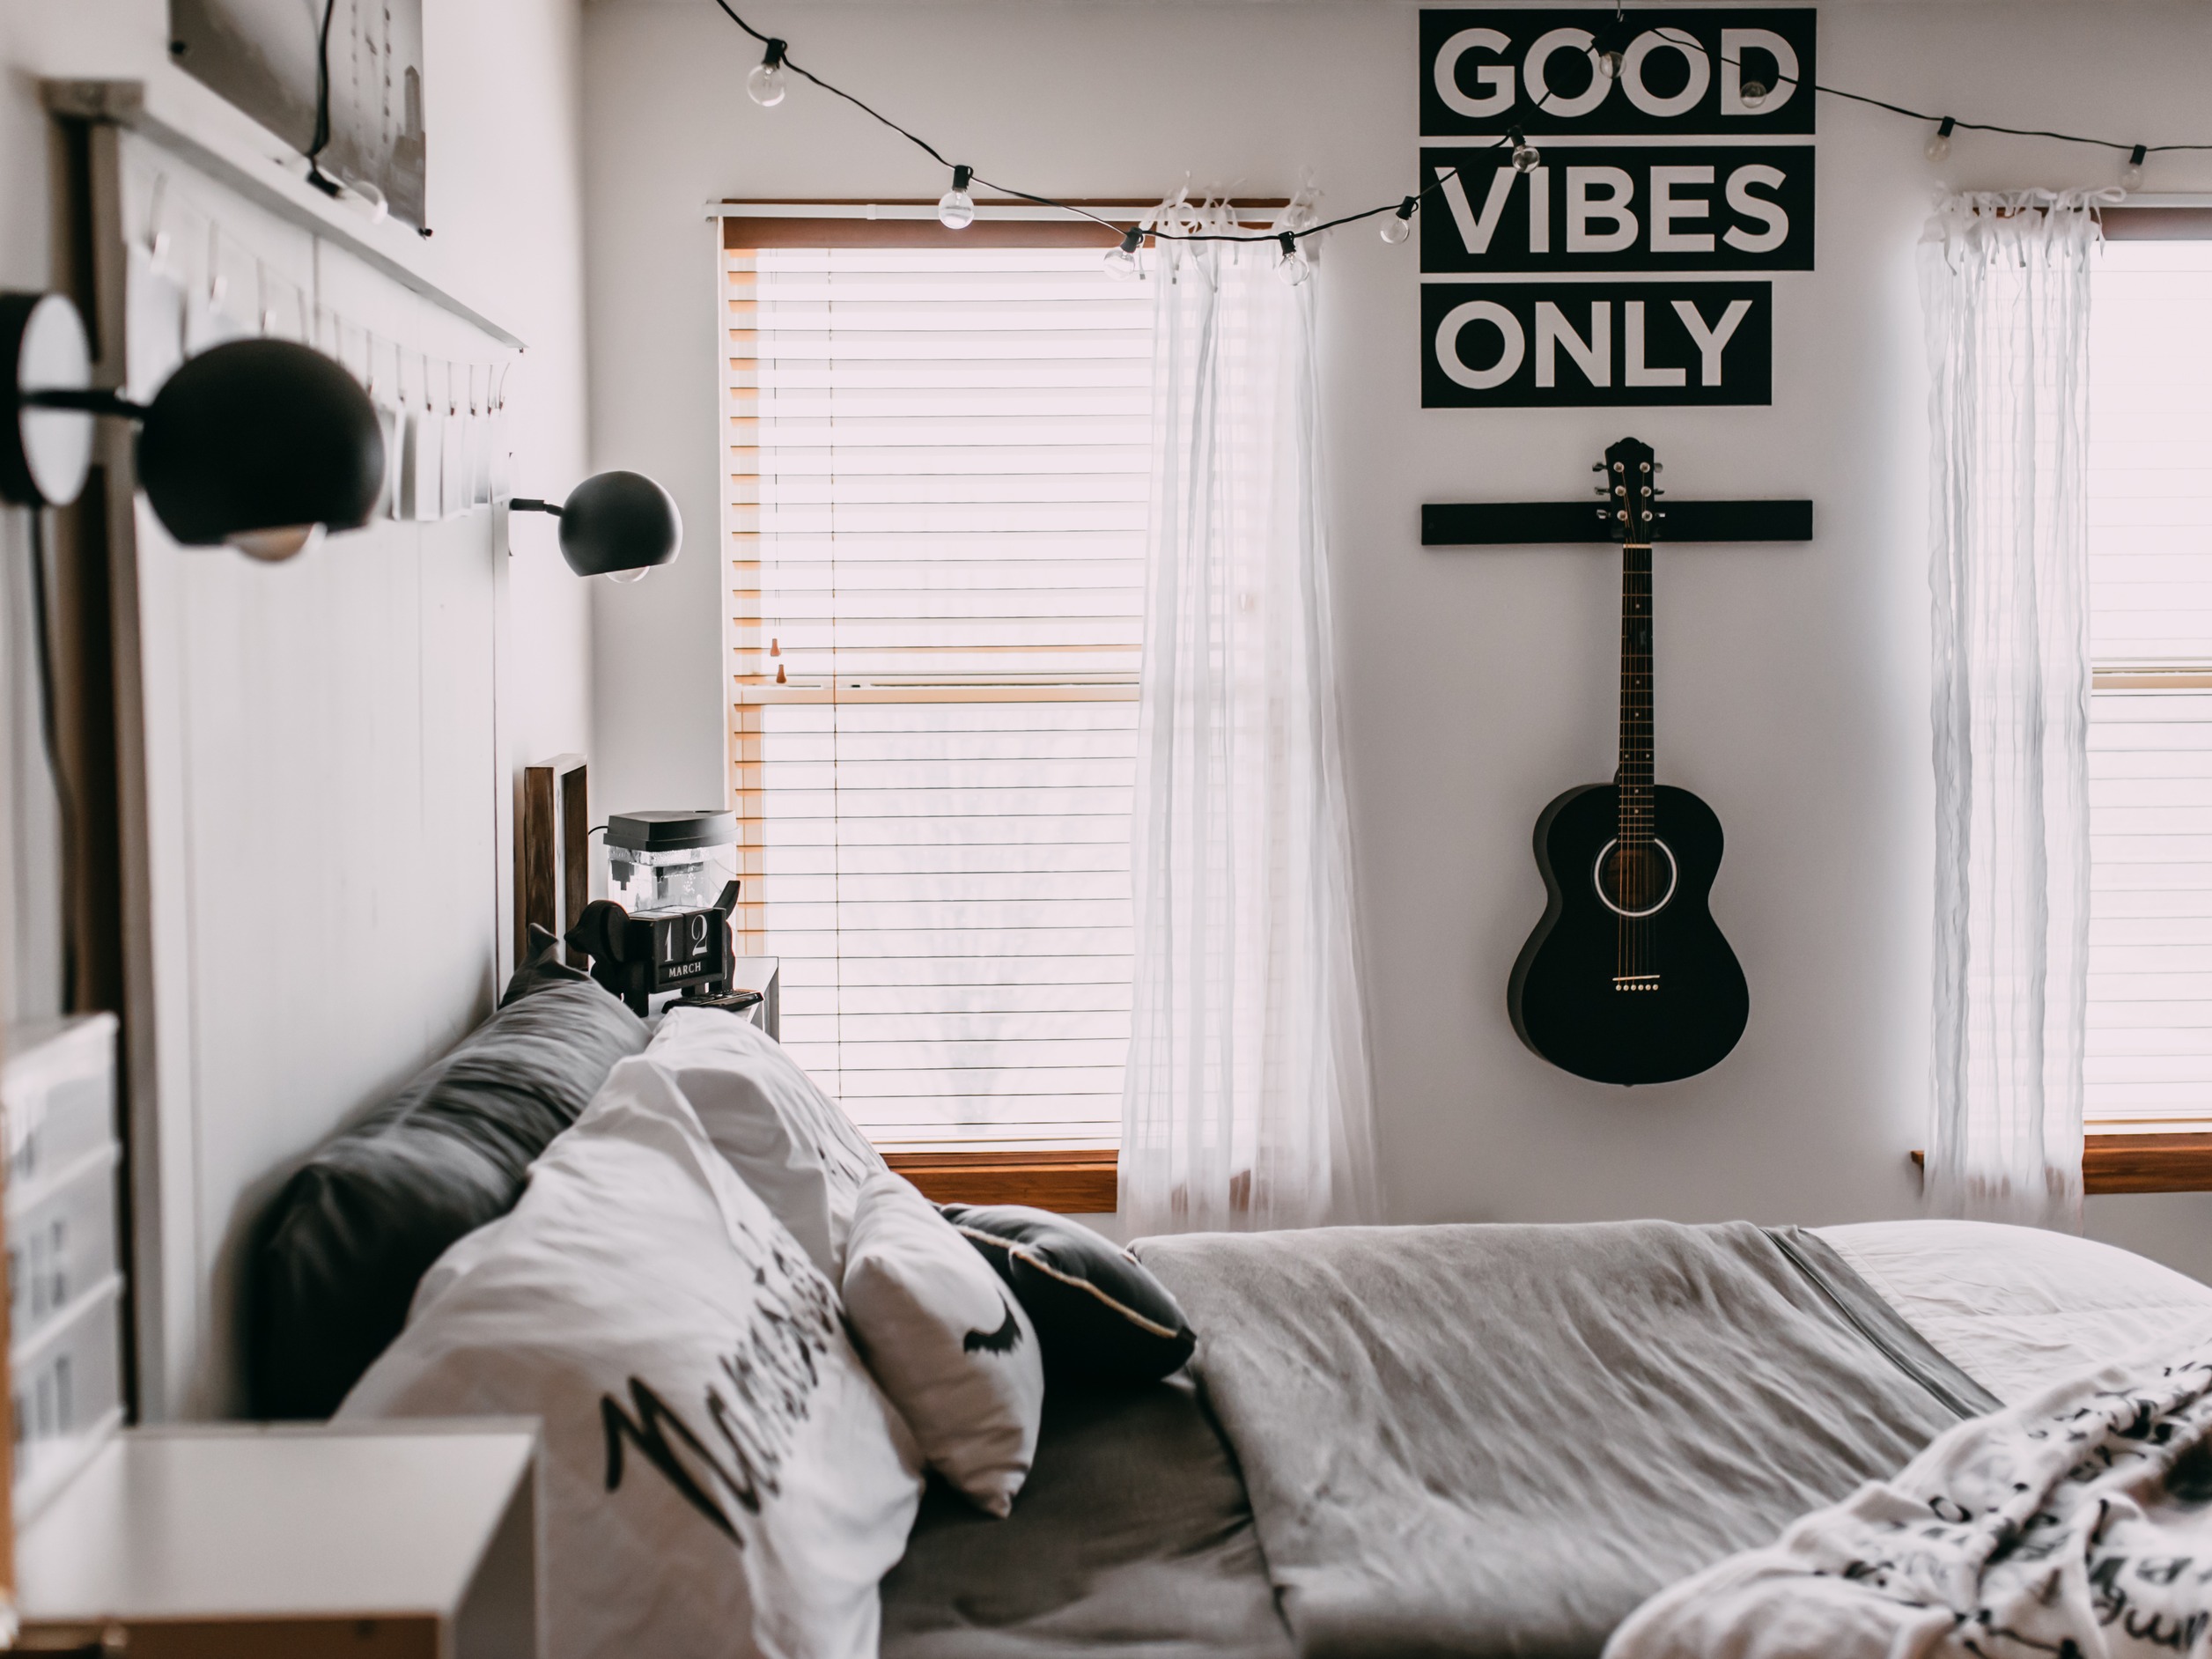 clean dorm room with guitar on the wall, string lights, and wall art that says "good vibes only"